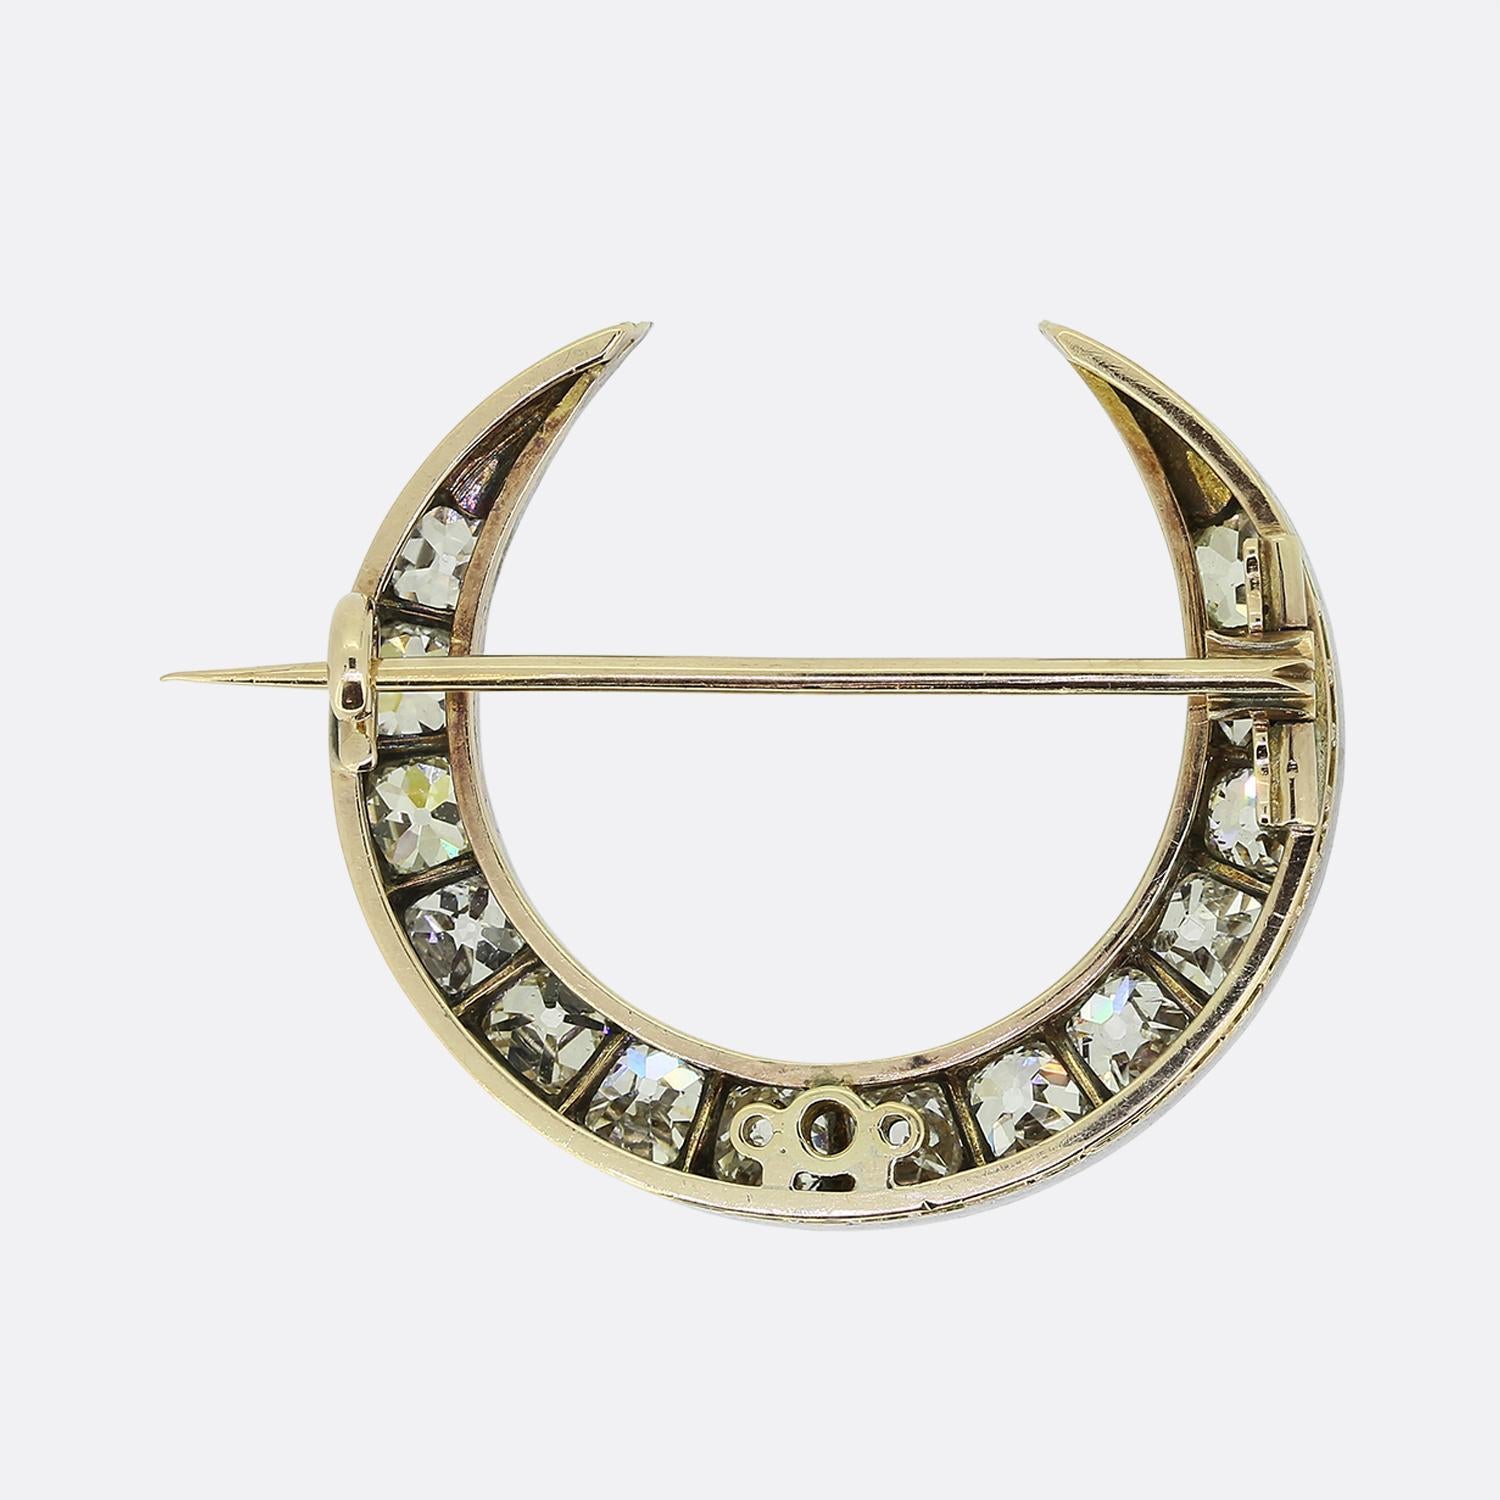 Here we have a lovely moon crescent brooch dating back to the Victorian period. This curved frame has been crafted from yellow gold with a silver setting playing host to a single row of chunky round faceted old mine cut diamonds. These stones